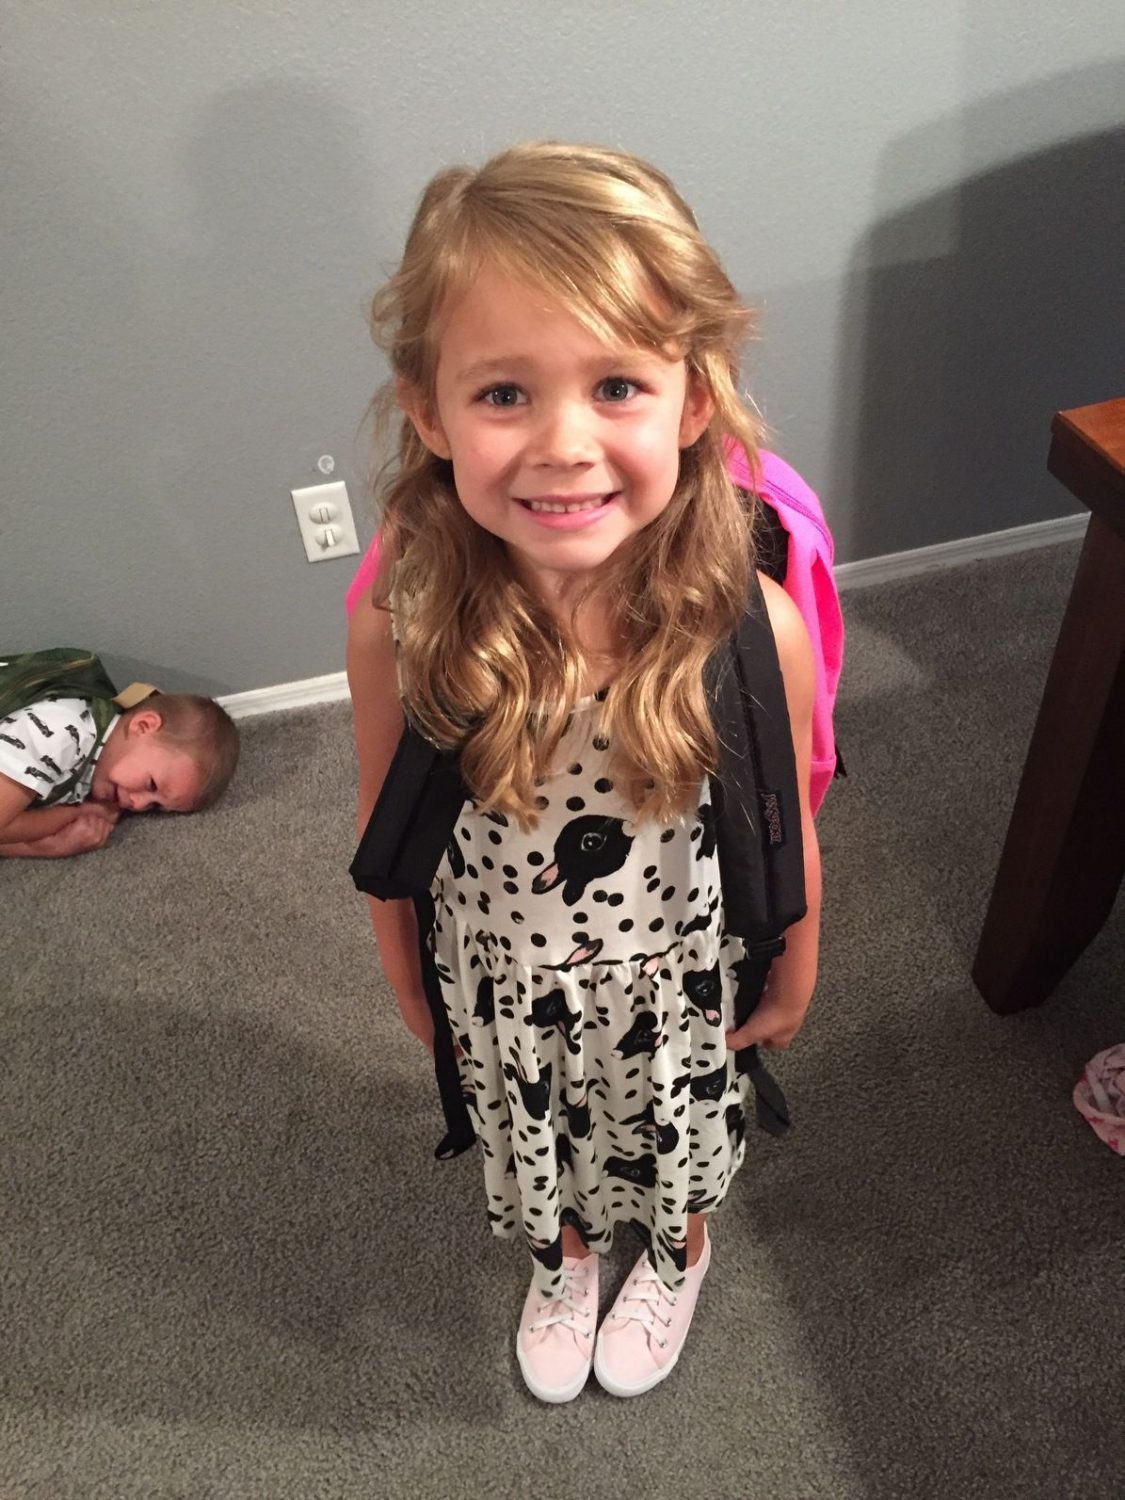 13 before and after photos of kids on their first day of school that prove first days are rough